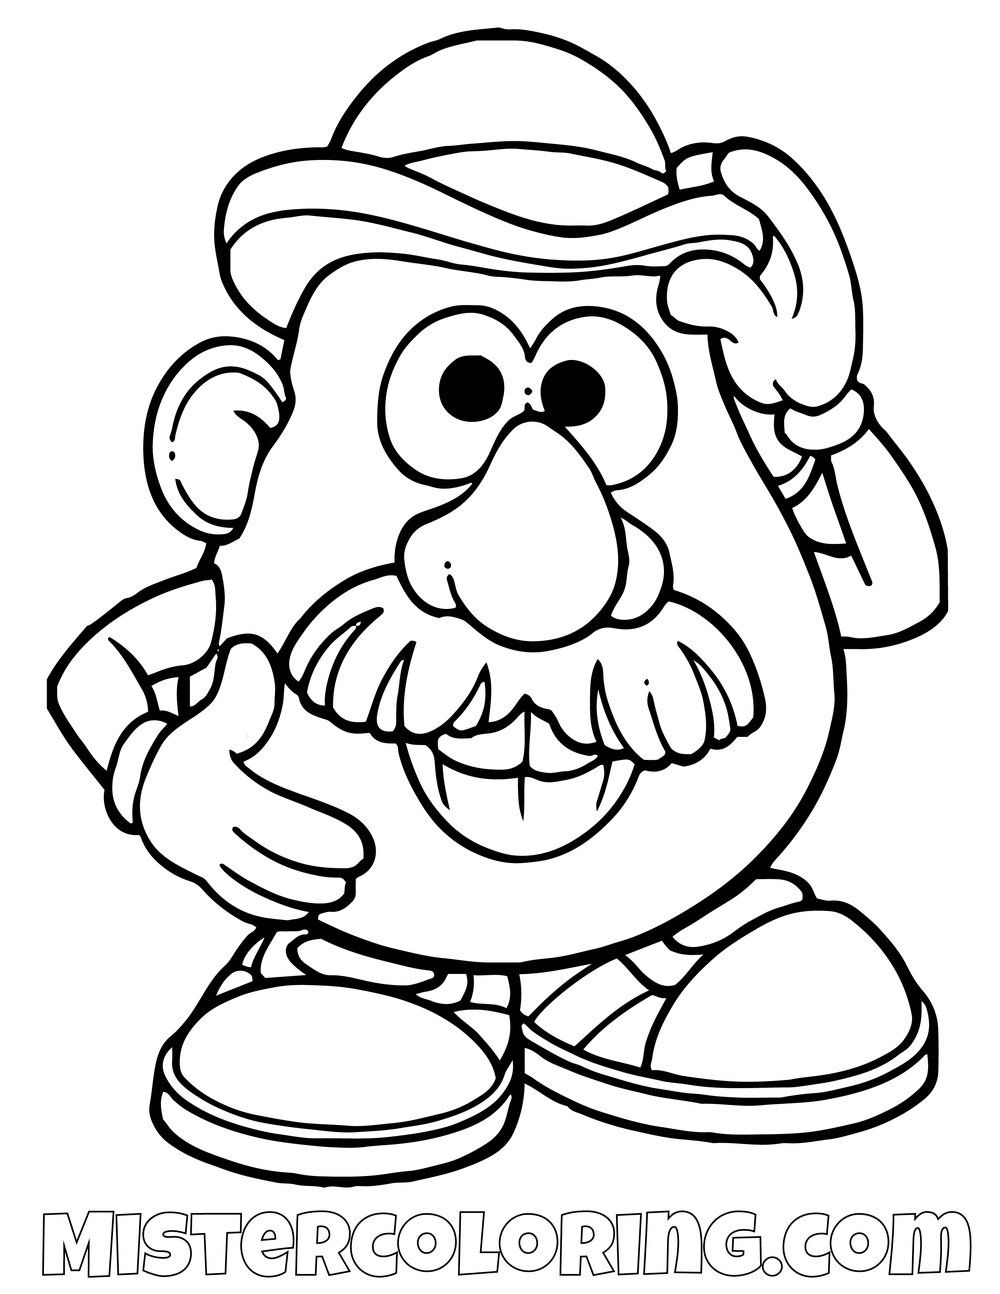 Mr. Po Head Greeting Toy Story Coloring Page | Disney avec Coloriage Mr Patate 